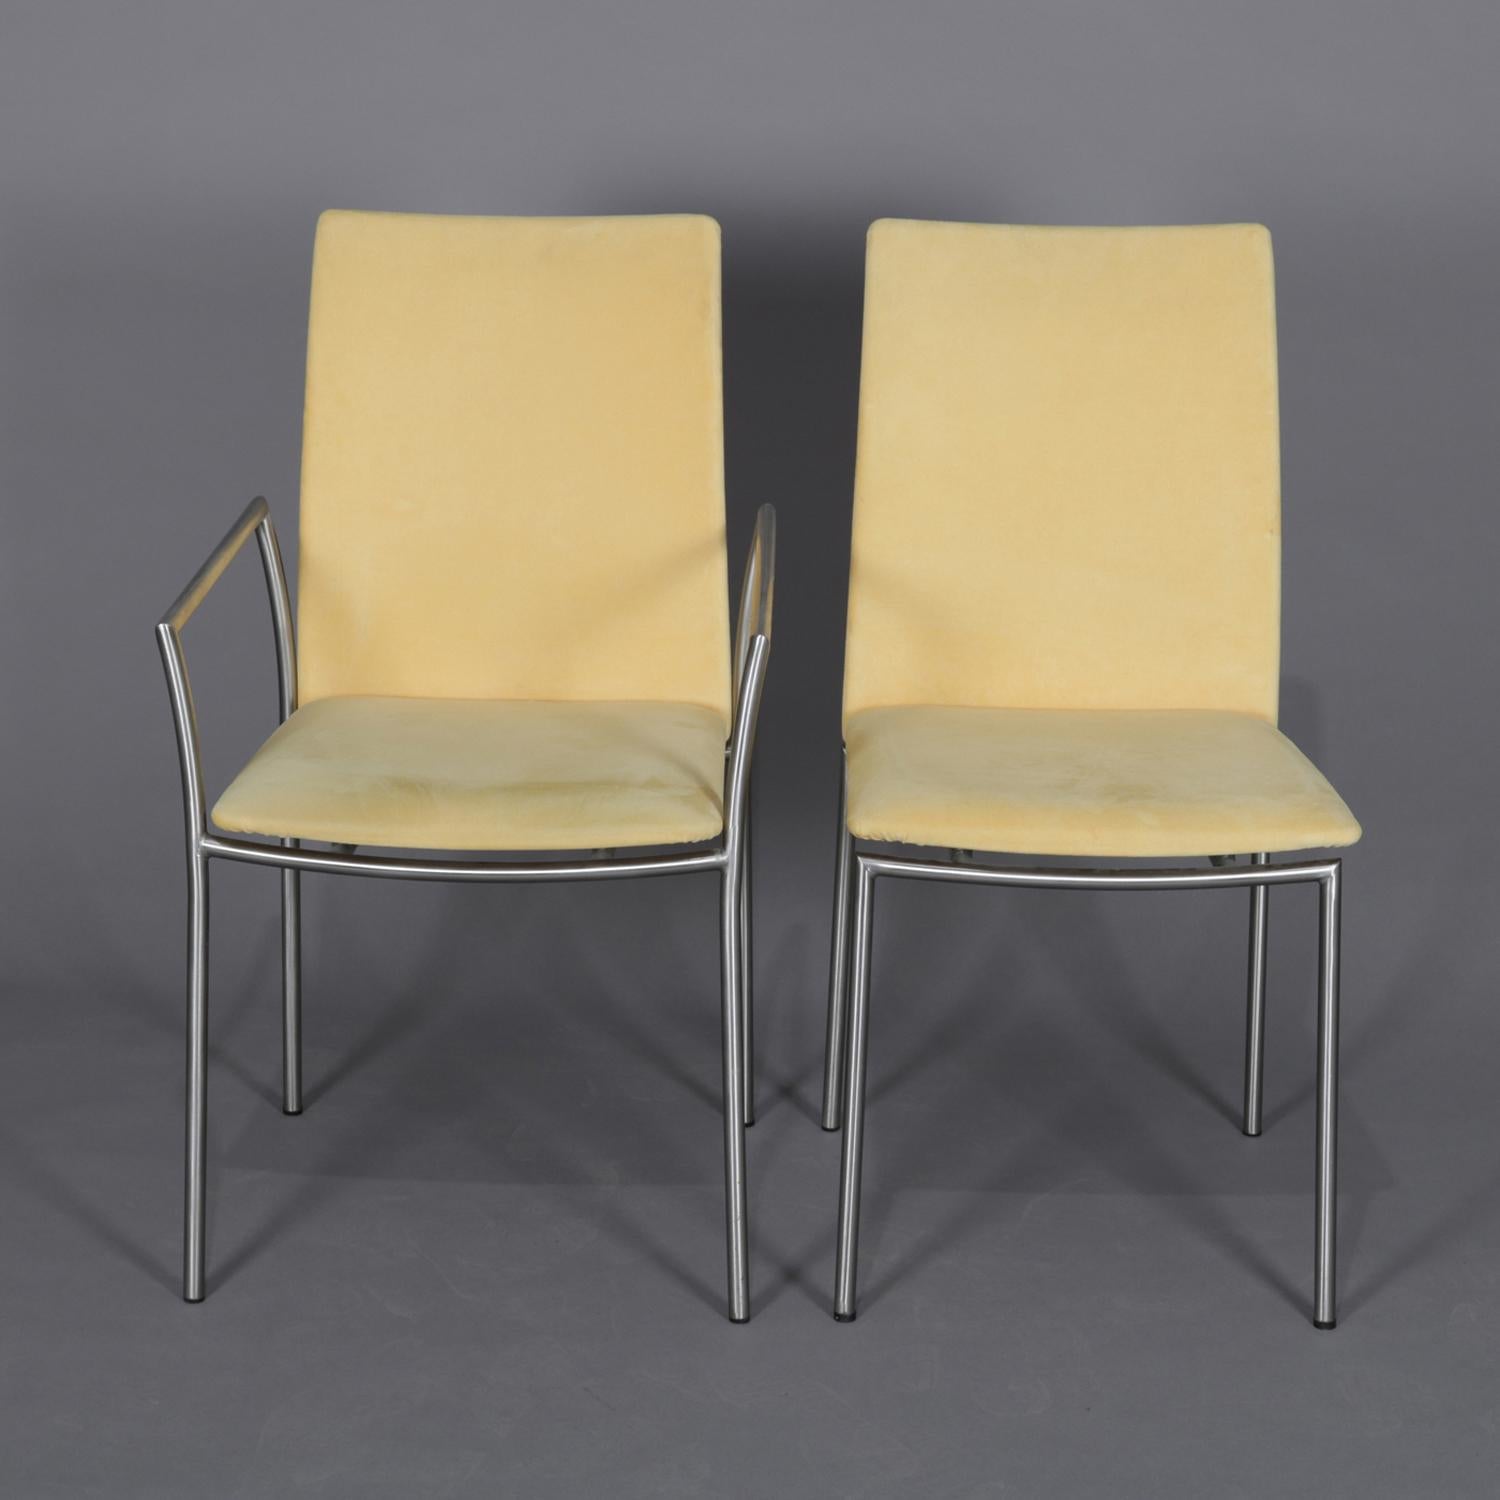 A set of eight Danish Mid-Century Modern Minimalist dining chairs by Skovby feature chrome frames with upholstered seats and backs, set includes two armchairs and six side chairs, en verso original label, 20th century.

Measures: armchairs 21